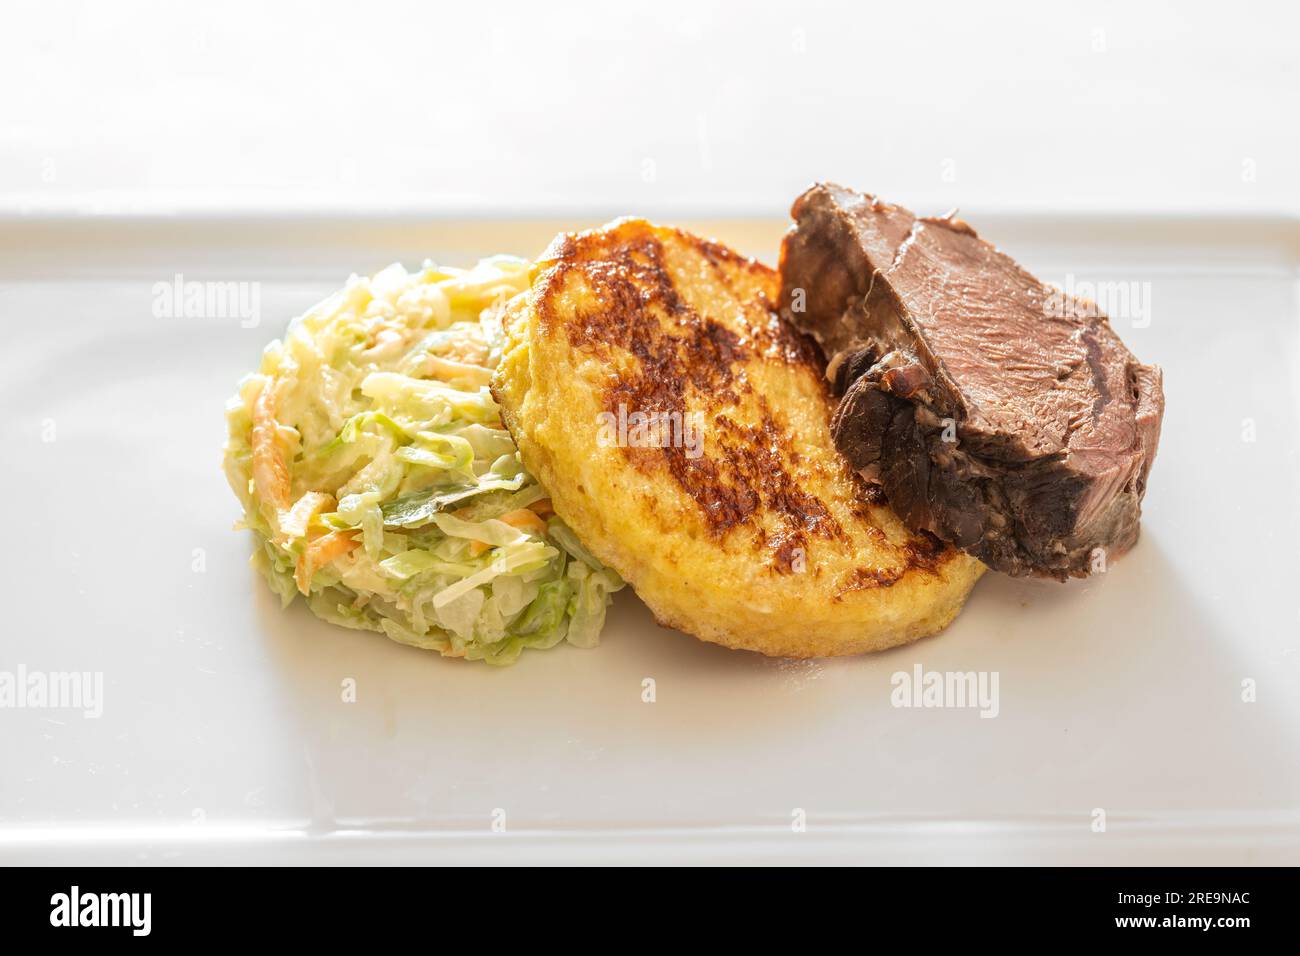 Roast deer, flat bread dumpling and round shaped vegetables, gourmet dish on a white plate, copy space, selected focus, narrow depth of field Stock Photo